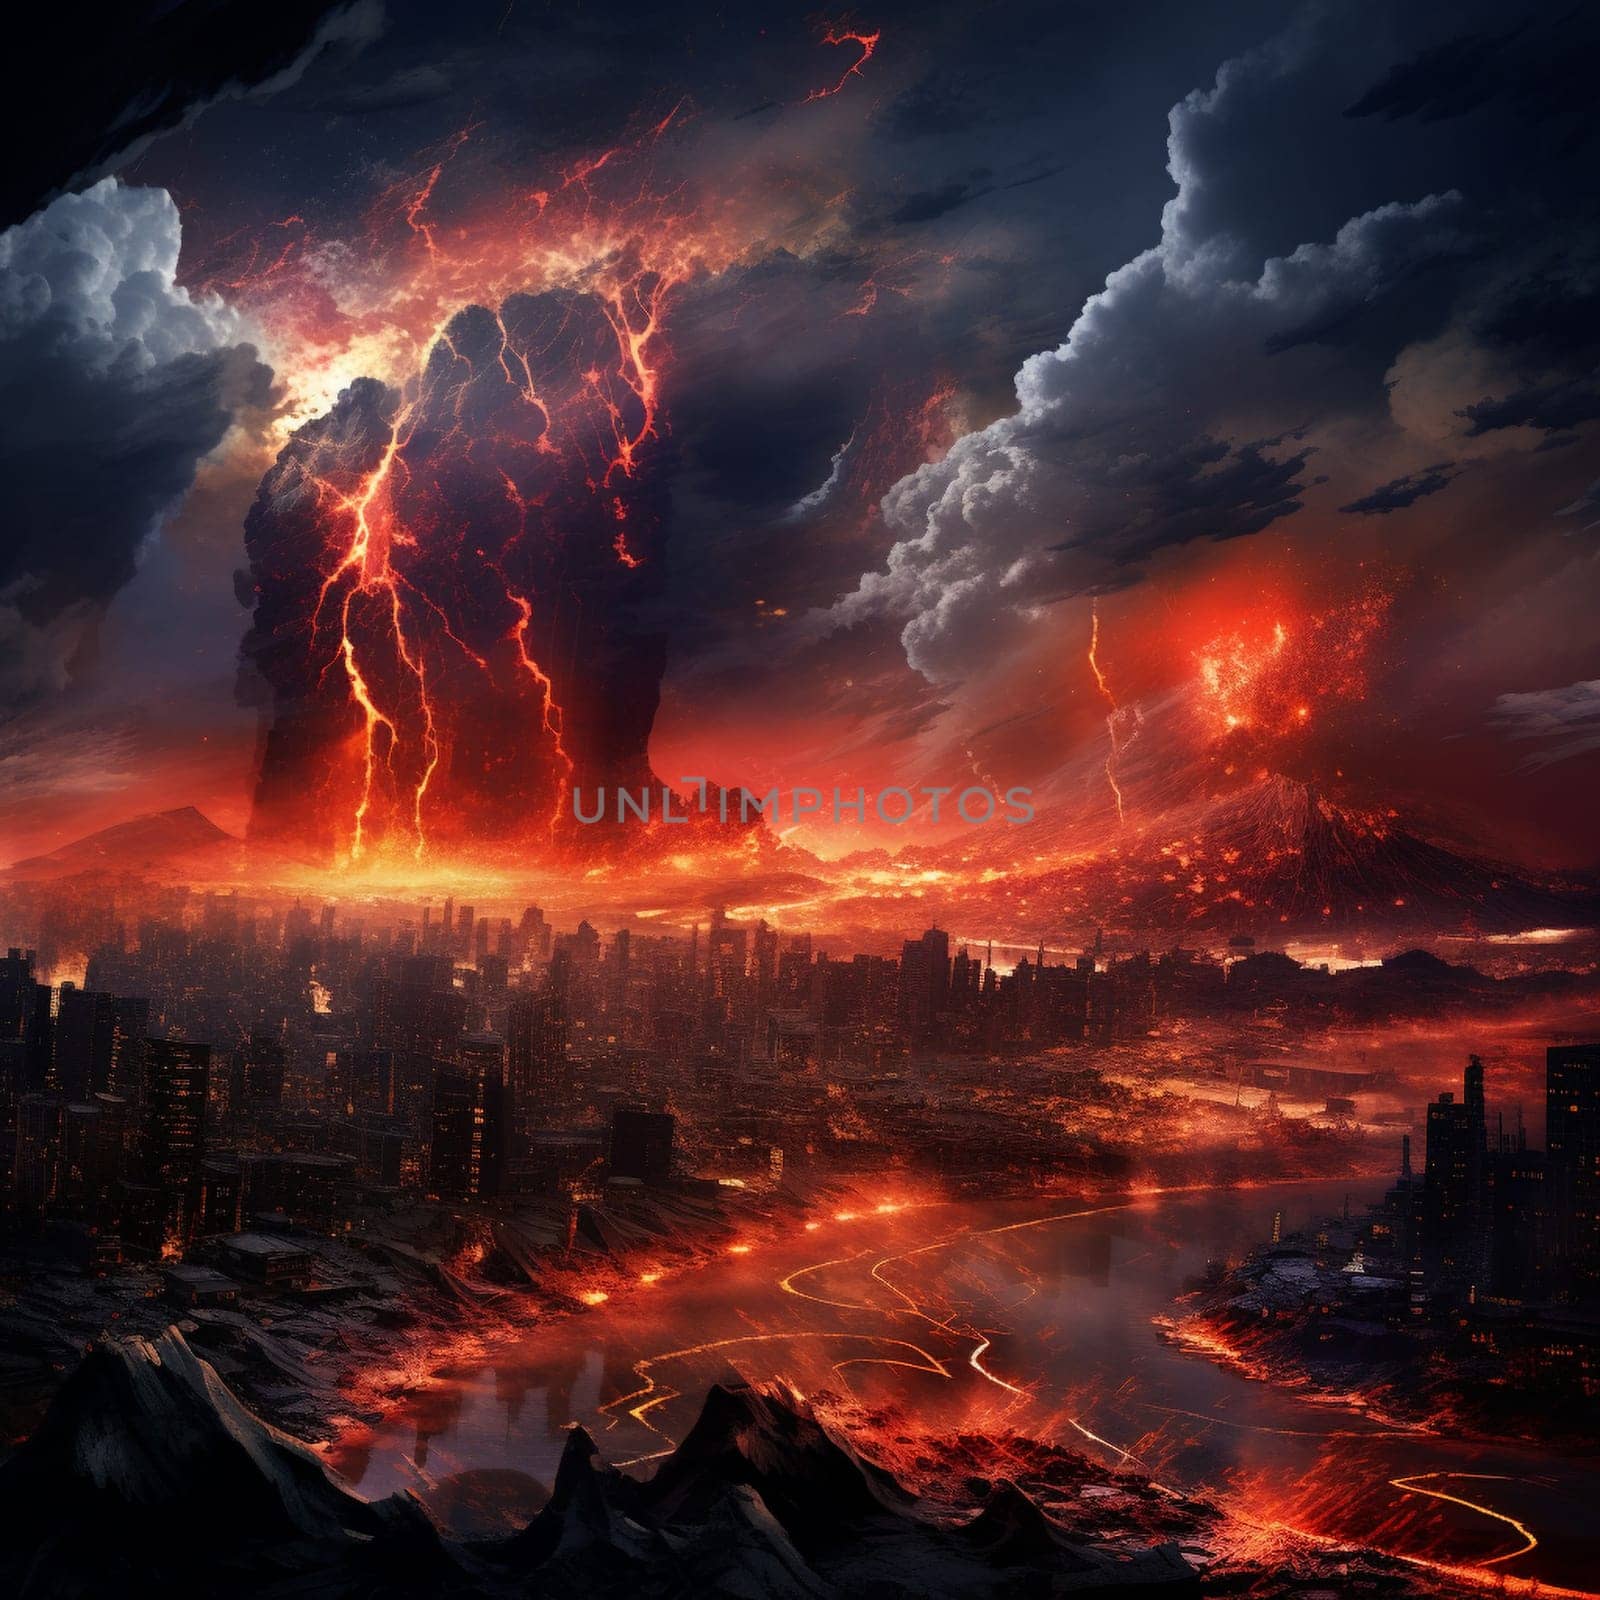 Experience the awe-inspiring sight of a surreal volcanic eruption engulfing a futuristic cityscape in the image titled 'Blazing Torrent.' The vibrant eruption illuminates the night with its fiery glow, casting a mesmerizing spectacle for the beholder. Watch as a cascading torrent of lava pours forth with incredible force and heightened intensity, contrasting against the glittering lights of the urban skyline. The dynamic scene is further accentuated by billowing clouds of ash and smoke, capturing the raw power and beauty of this volcanic phenomenon.